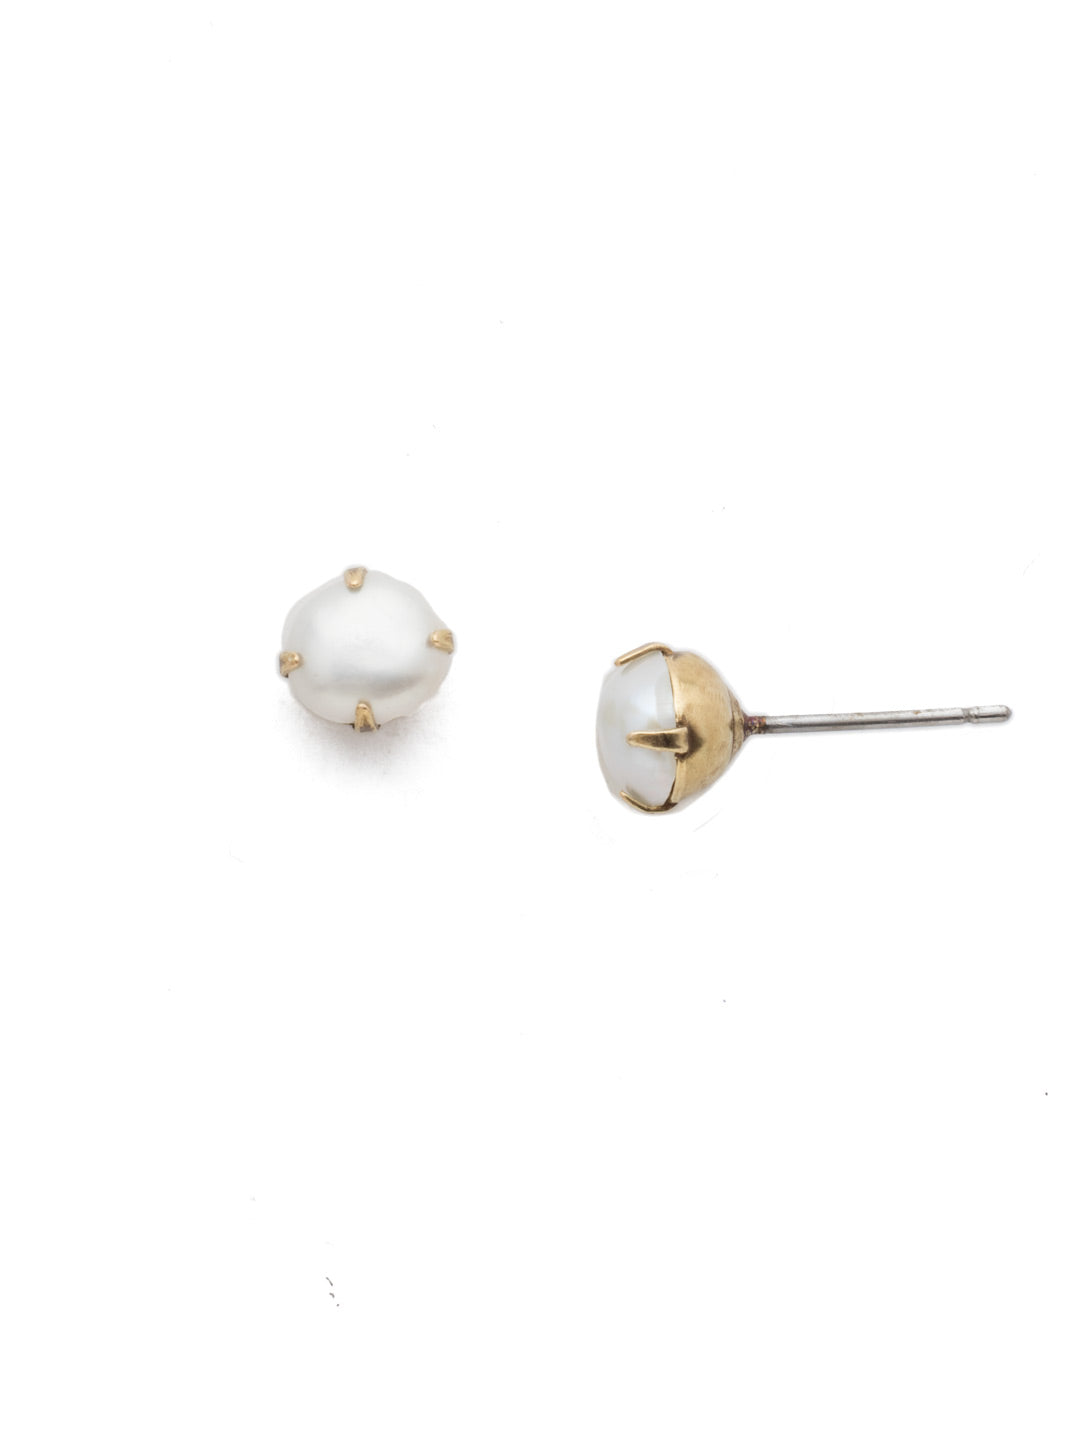 Langley Stud Earring - 4EET7AGMDP - <p>Simple yet stunning. You can't go wrong with pearl posts. Just ask our Langley Stud Earrings. From Sorrelli's Modern Pearl collection in our Antique Gold-tone finish.</p>